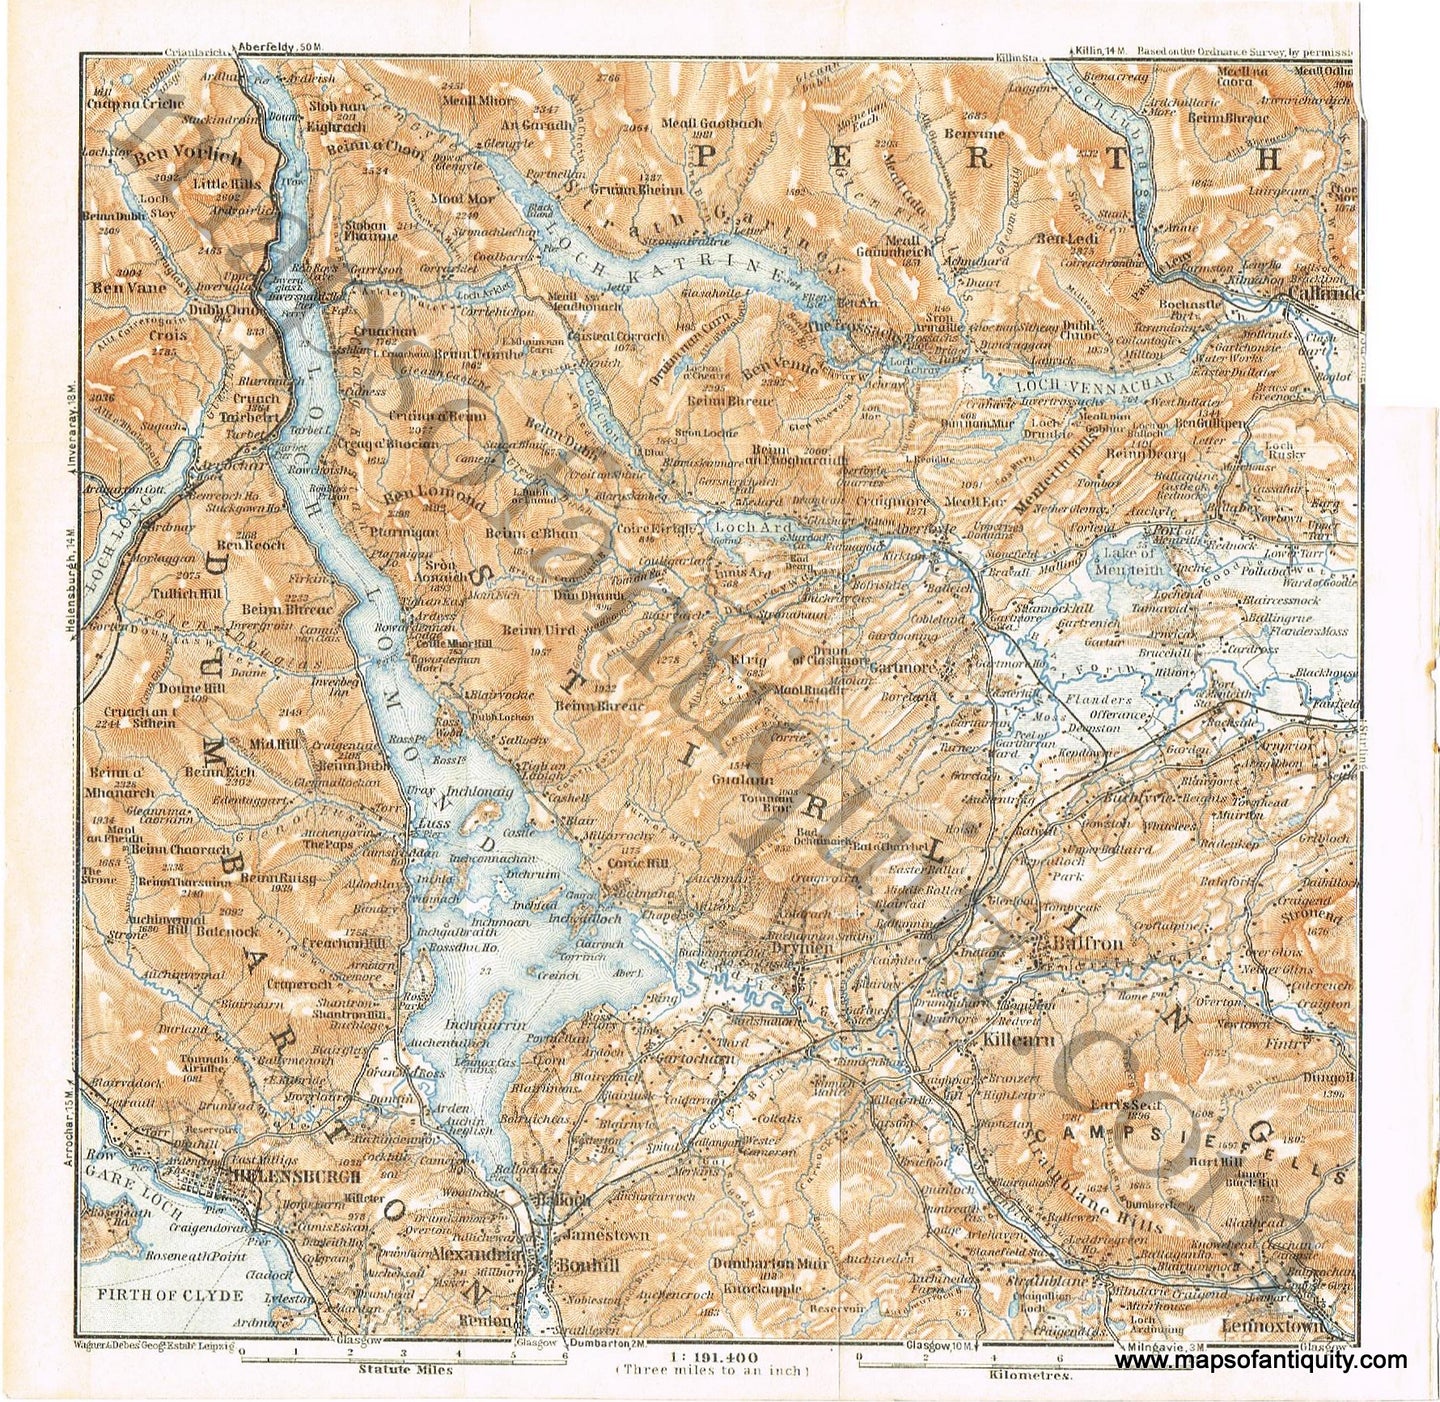 Antique-Map-City-Loch-Lomond-Trosachs-National-Park-Stirling-Dumbarton-Perth-Scotland-Scottish-Baedeker-1927-1920s-1900s-Early-20th-Century-Maps-of-Antiquity